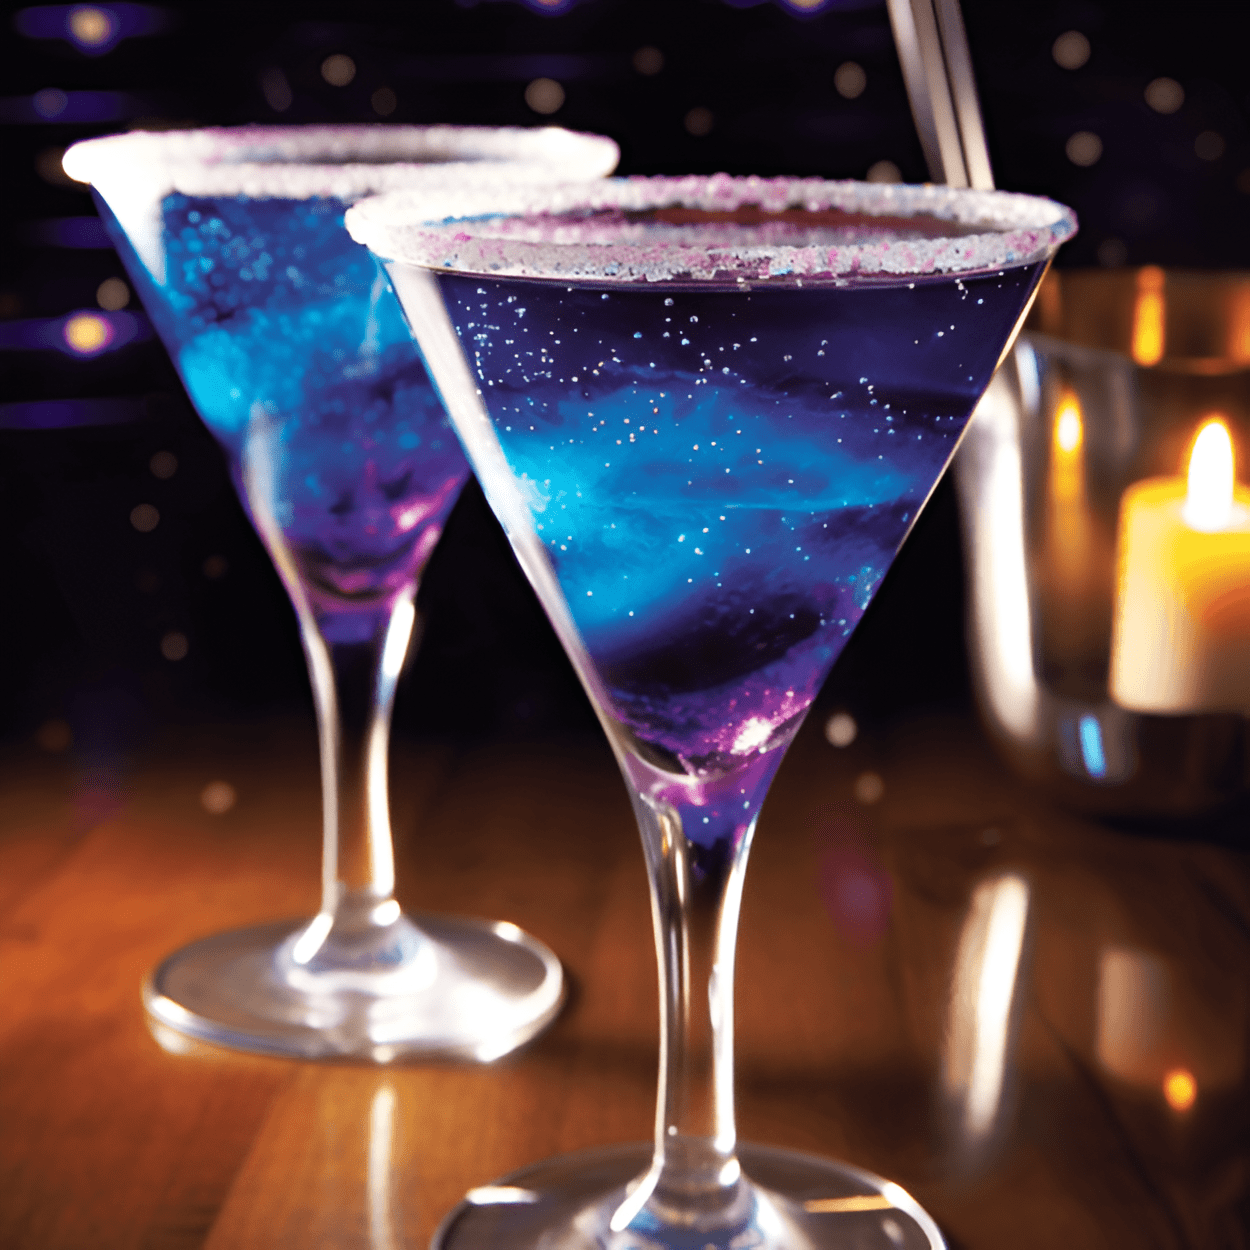 Galaxy Cocktail Recipe - The Galaxy Cocktail is a unique blend of sweet and sour, with a hint of fruity flavors. It has a strong, yet smooth, taste that leaves a lasting impression. The combination of the different liquors gives it a complex flavor profile that is both intriguing and satisfying.